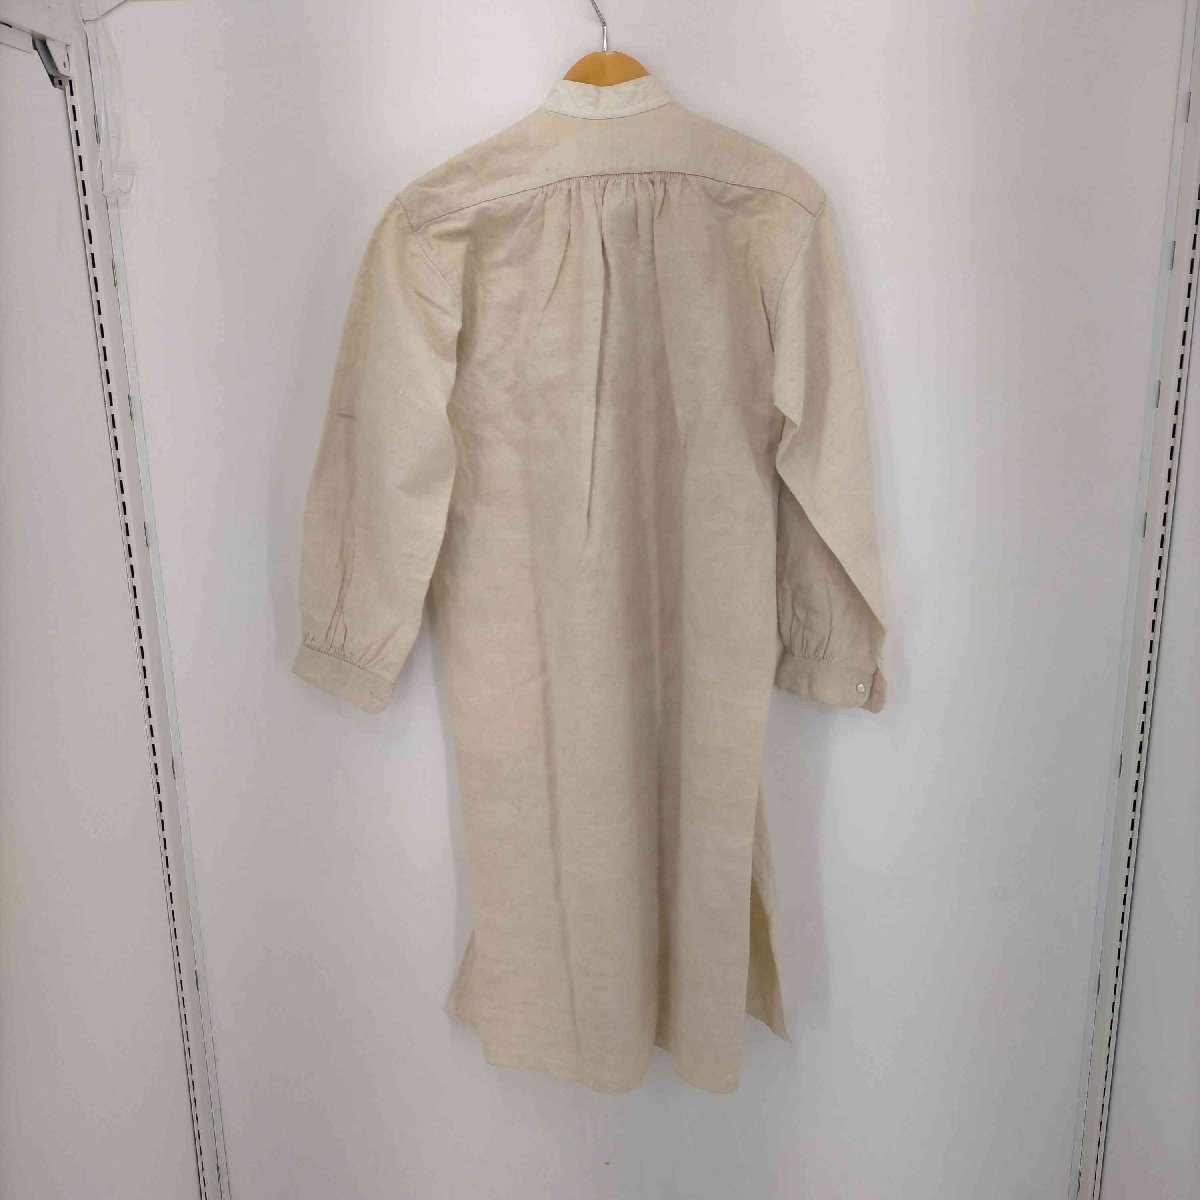 USED古着(ユーズドフルギ) 1900～20S France Antique linen Smock ア 中古 古着 0230_画像2